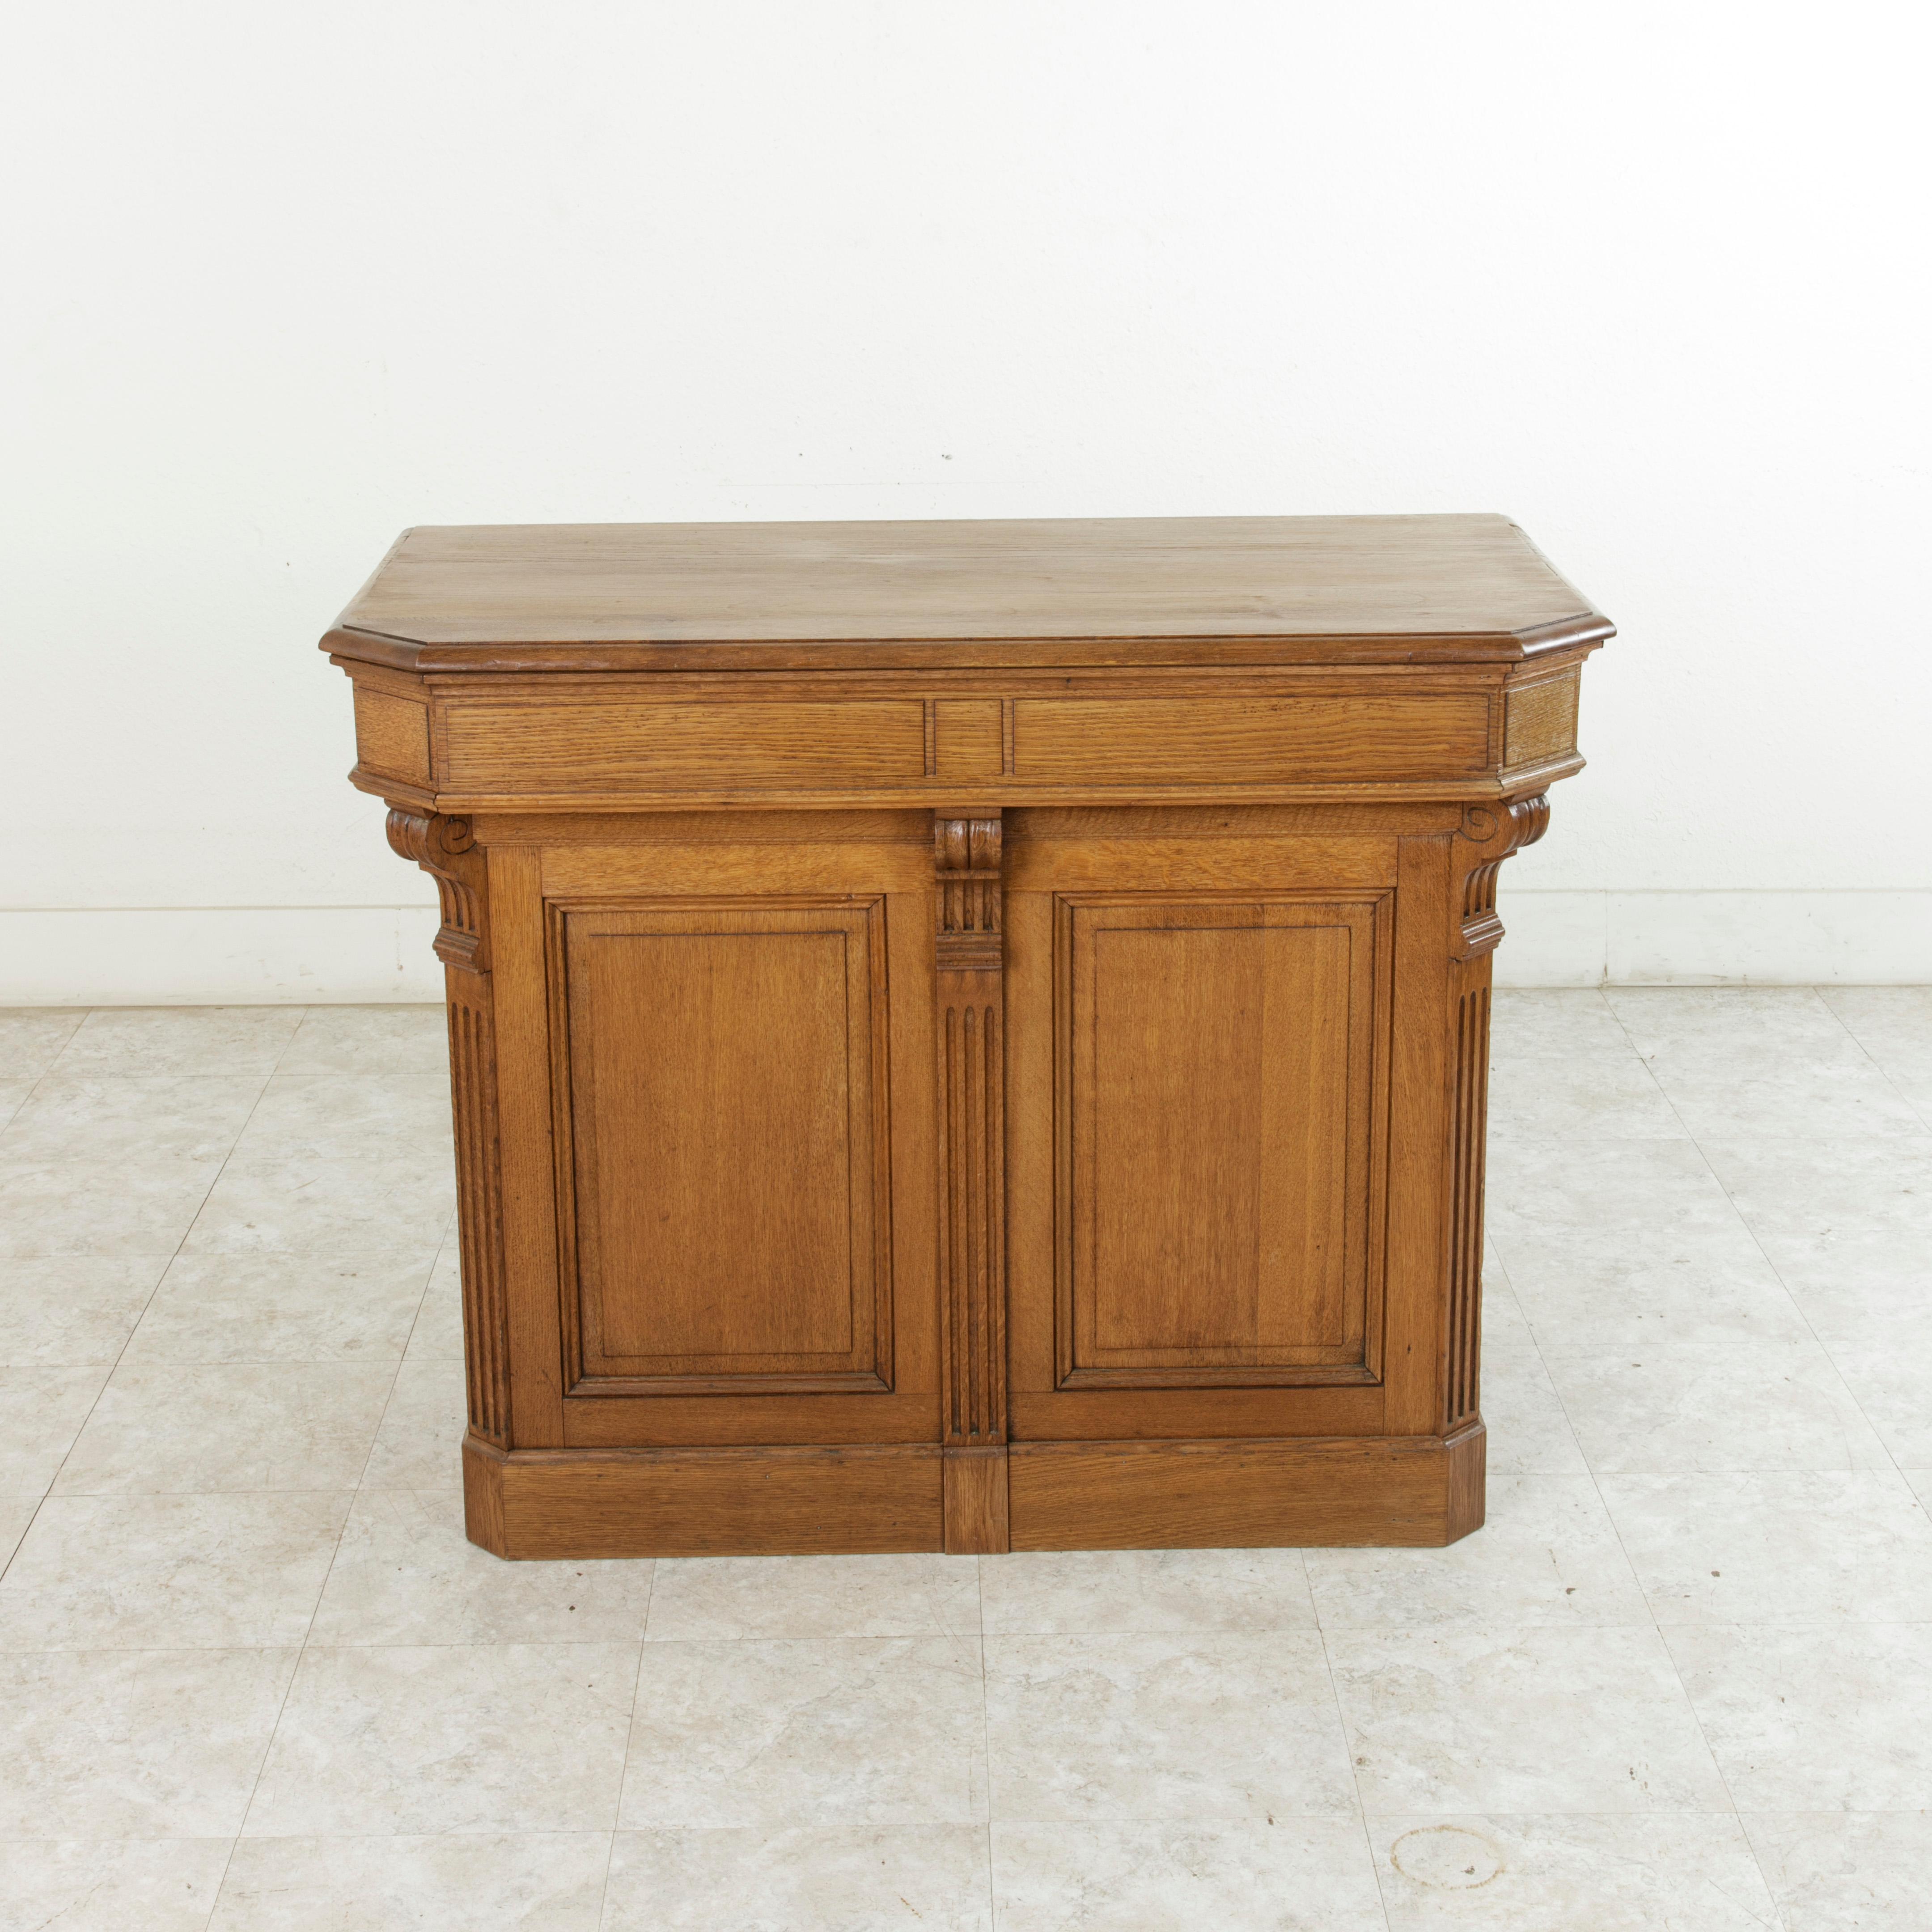 Originally in a French shop, this oak counter or bar features paneled sides and a beveled top. The counter itself stands at 35.5 inches in height from the floor to the top of the work space. Scrolled brackets above the fluted half columns support